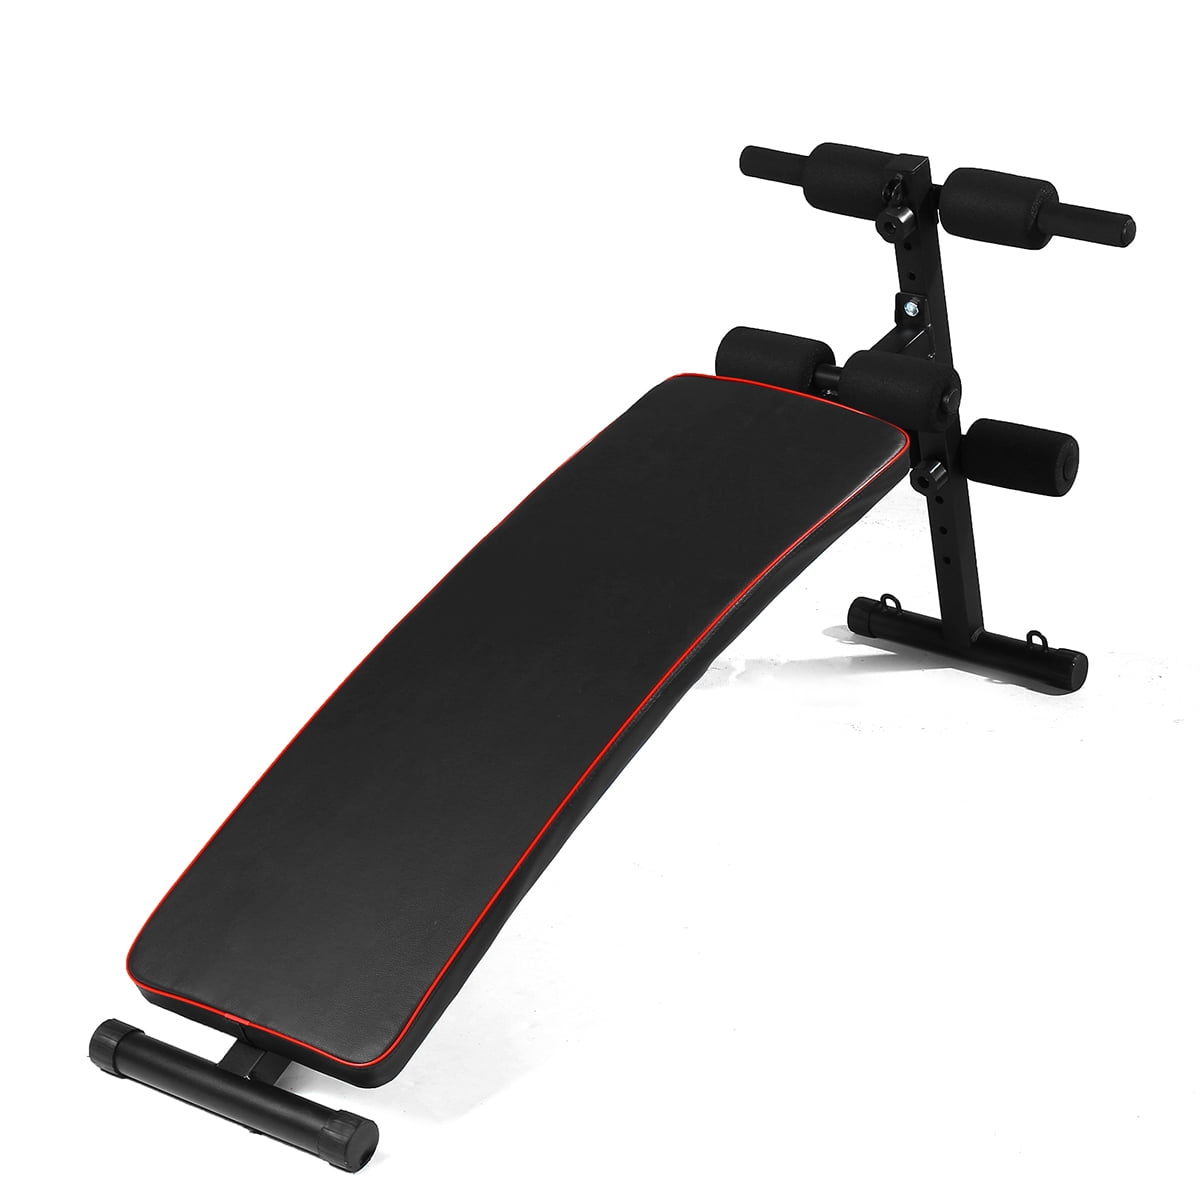 Adjustable Sit up Bench Crunch Board Abdominal Fitness for Home Gym Exercise 49&quot;x19.7&quot;x24&quot;